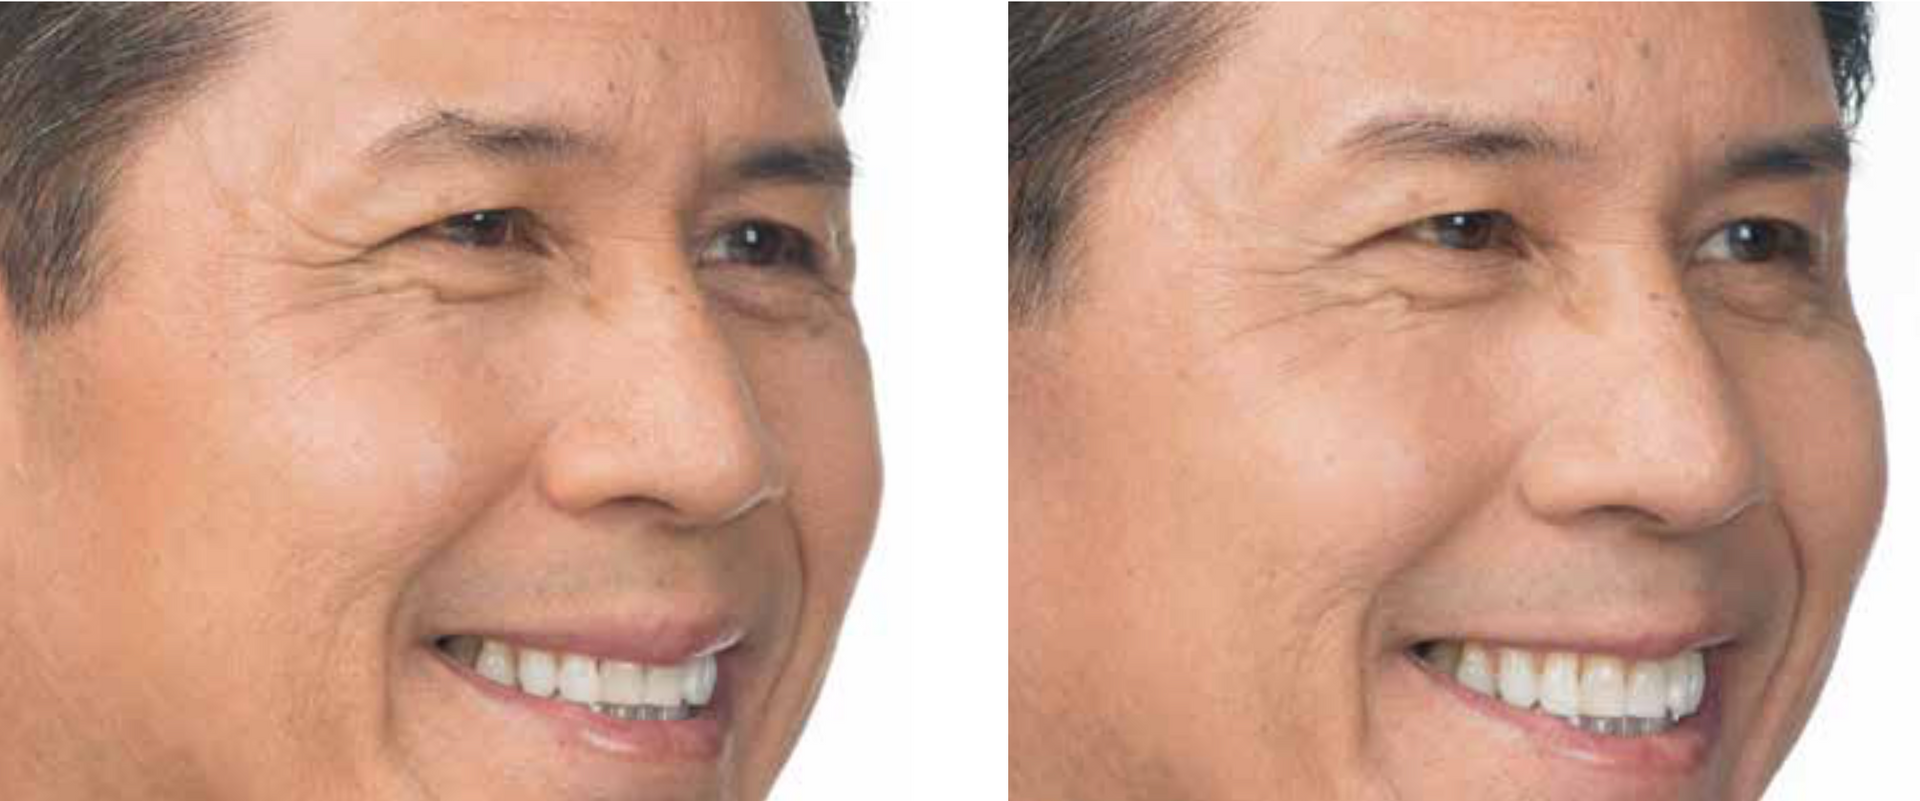 real patient before and after treatment with Botox injection